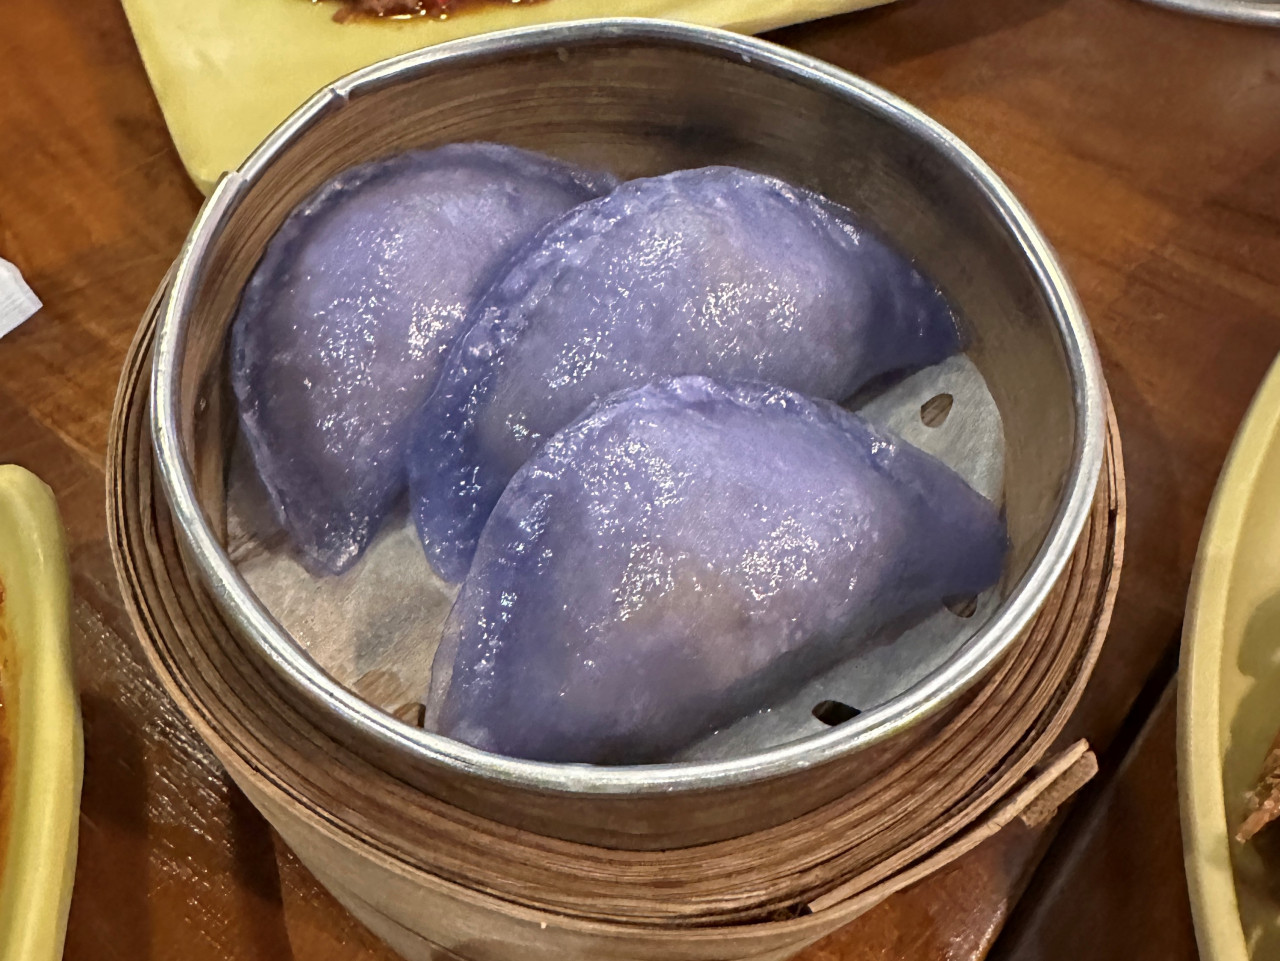 Despite the purple colour out of science fiction, the Kerabu Chicken Dumpling is filled with traditional Malaysian flavours. – Pic by Haikal Fernandez